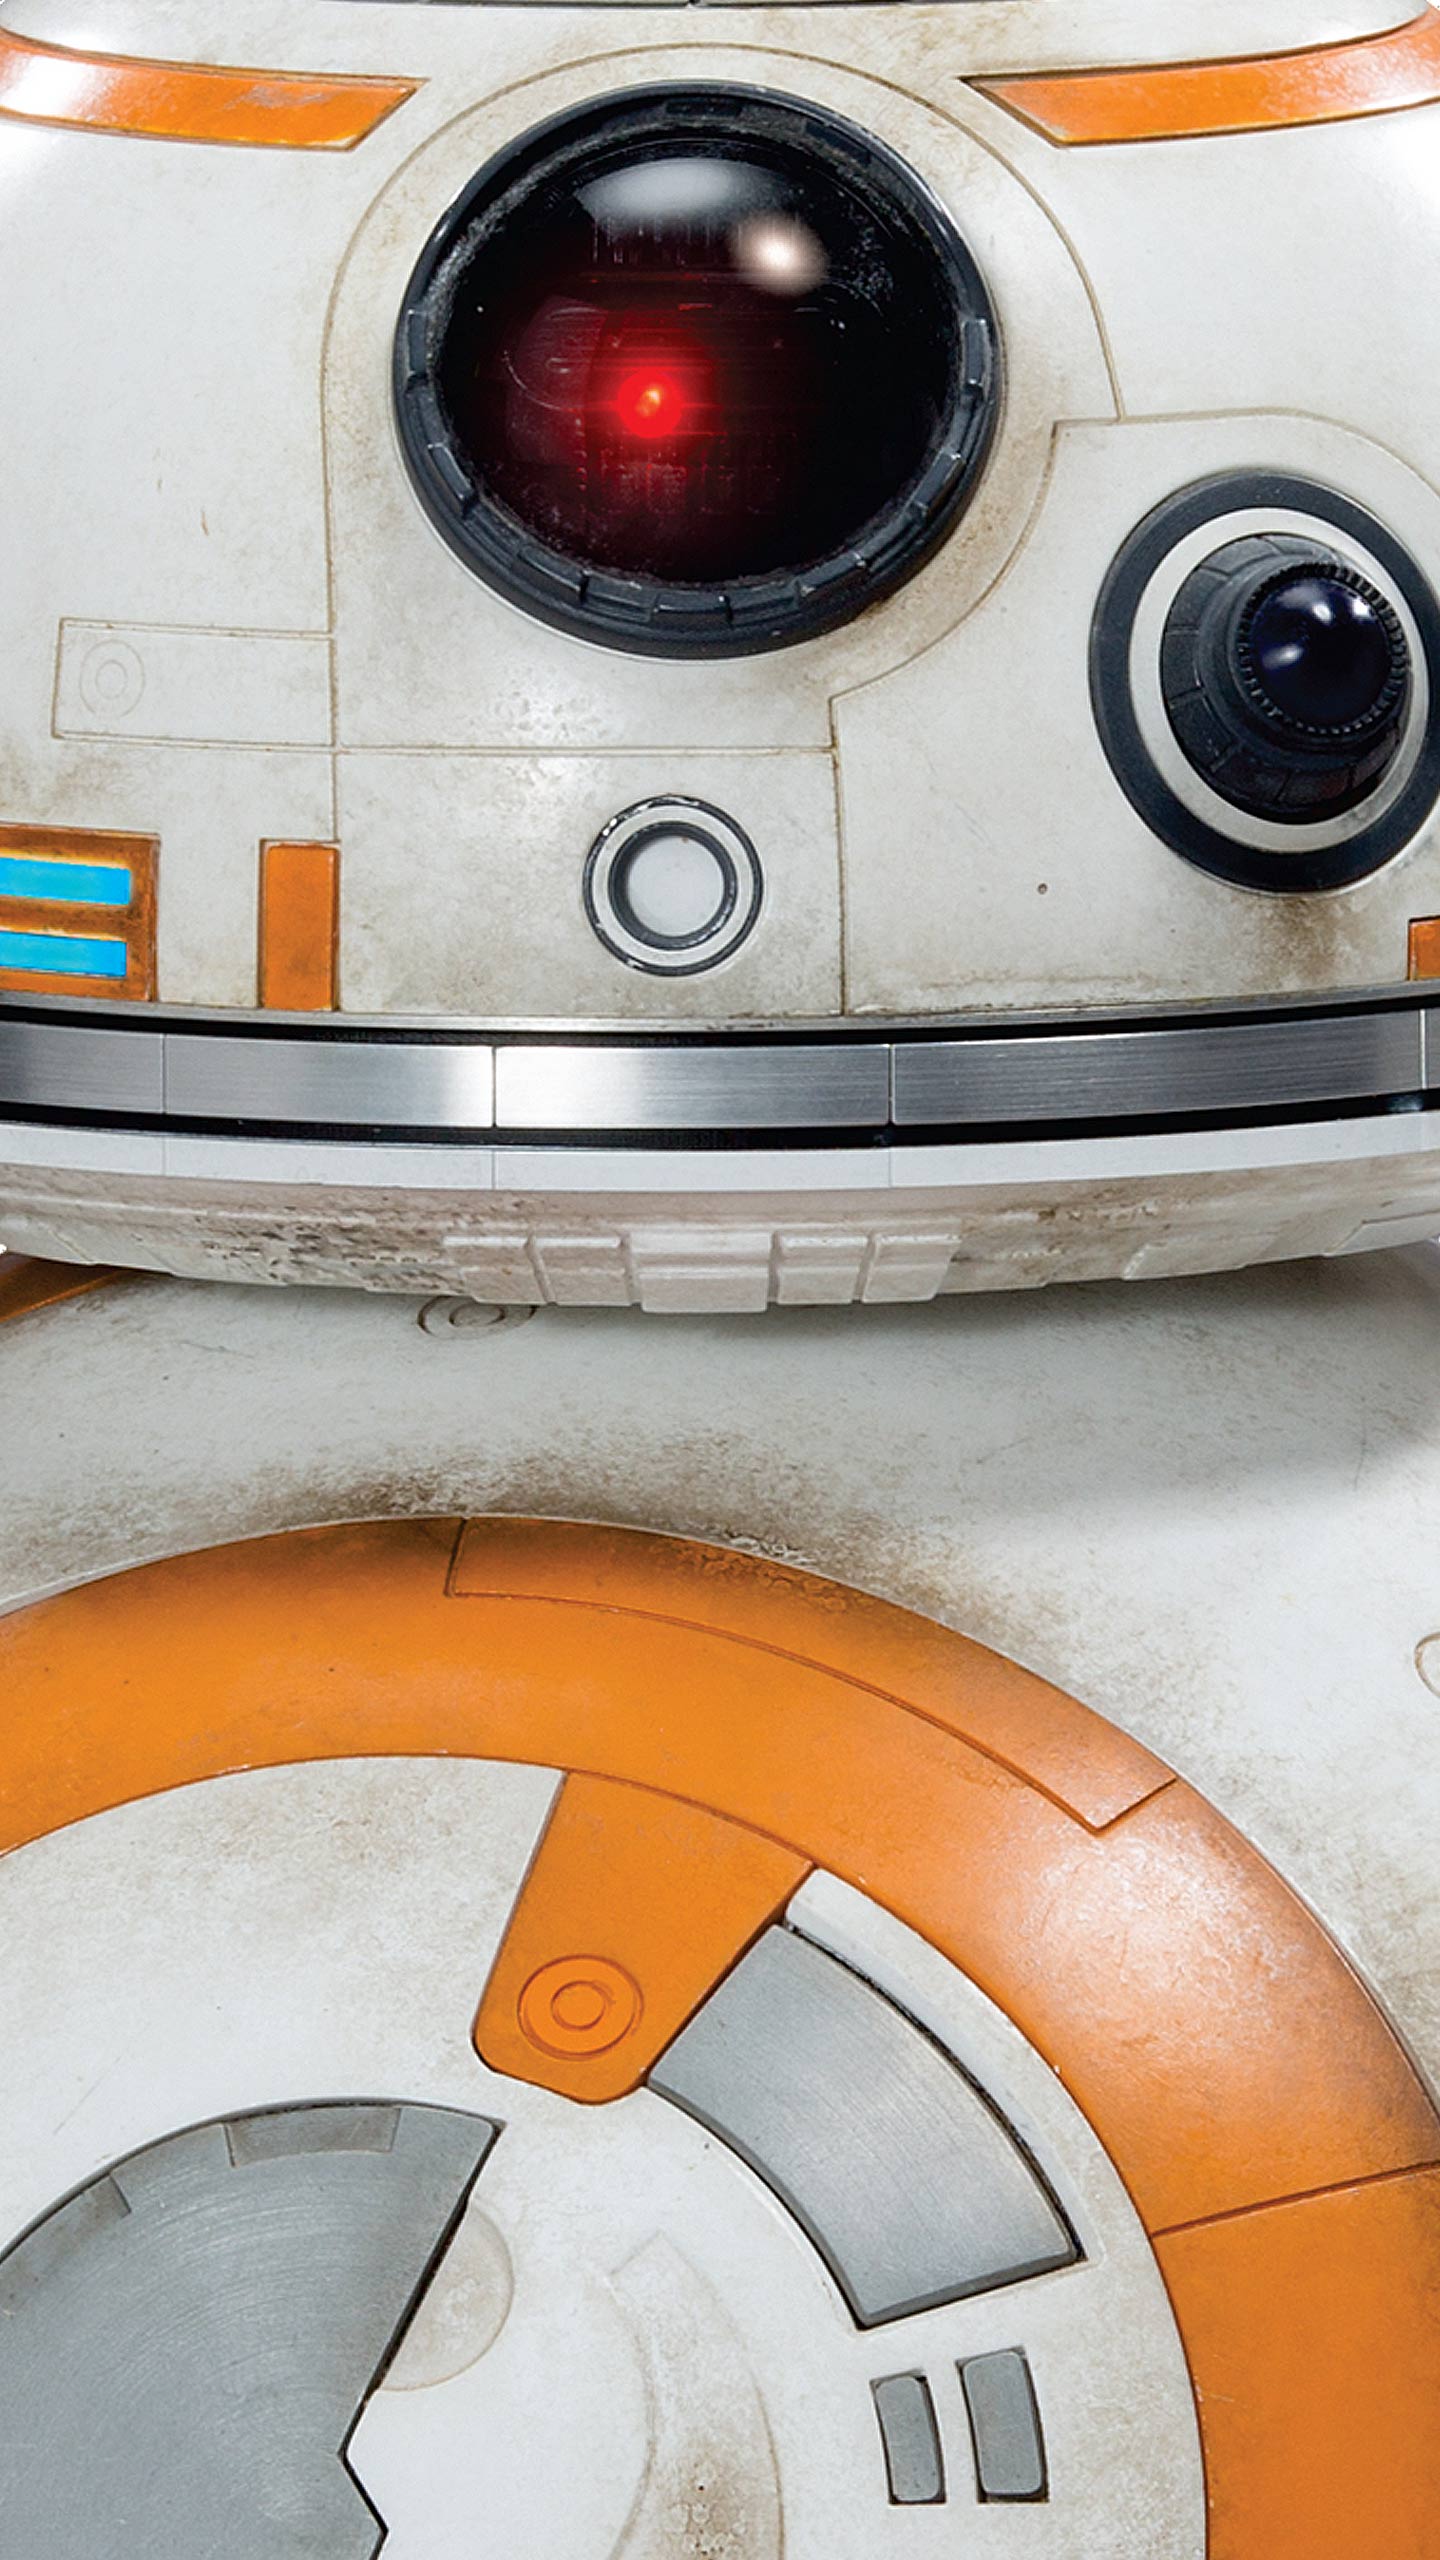 image about bb8. The force, Art and Google